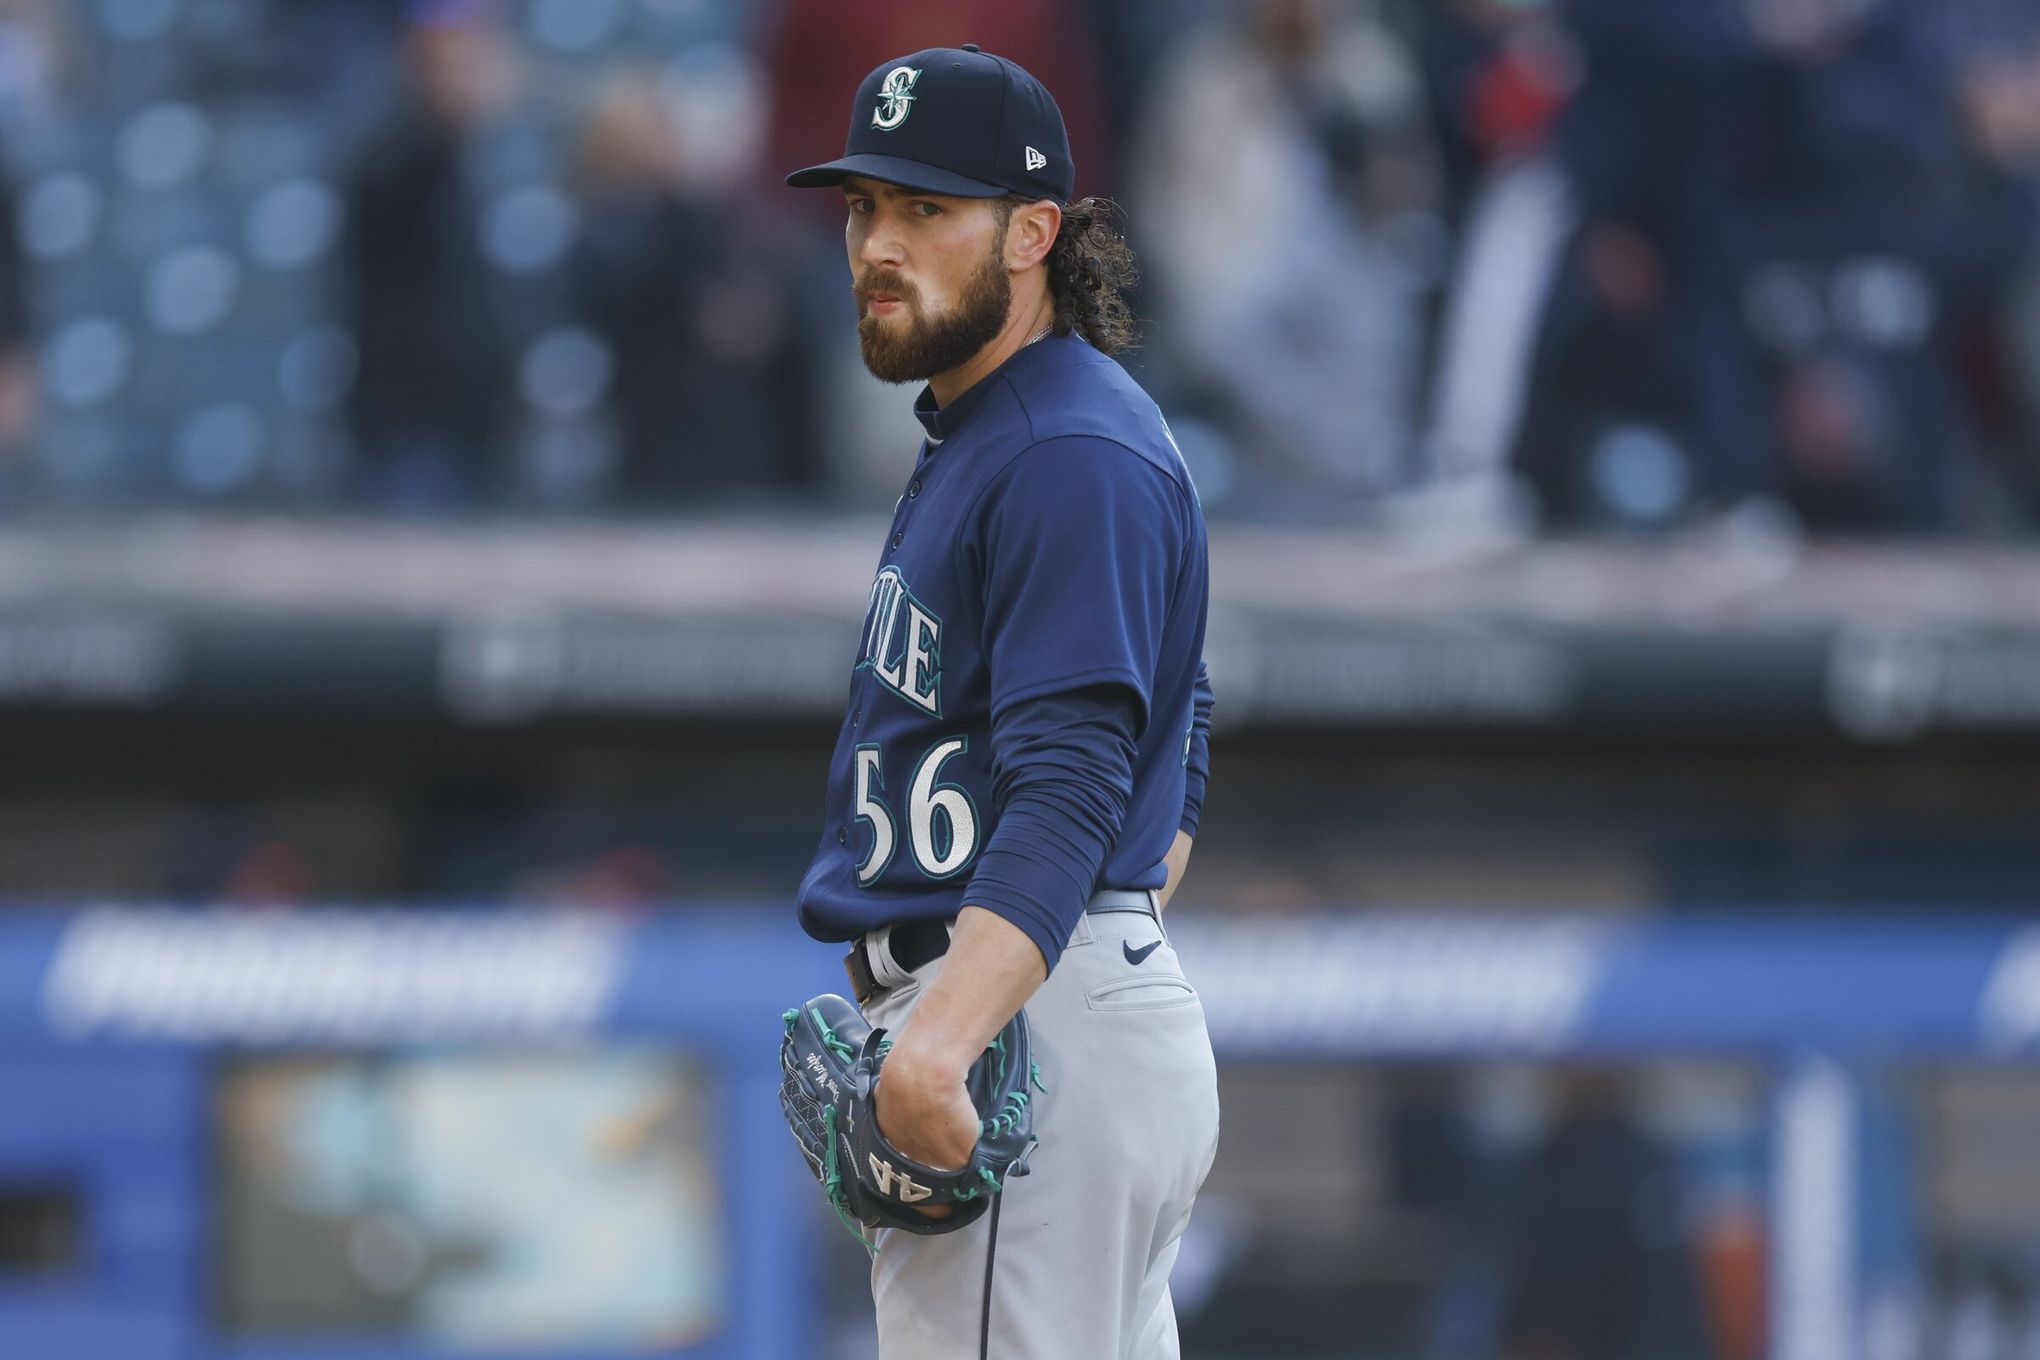 How can we be so optimistic after a sweep? The Mariners showed why